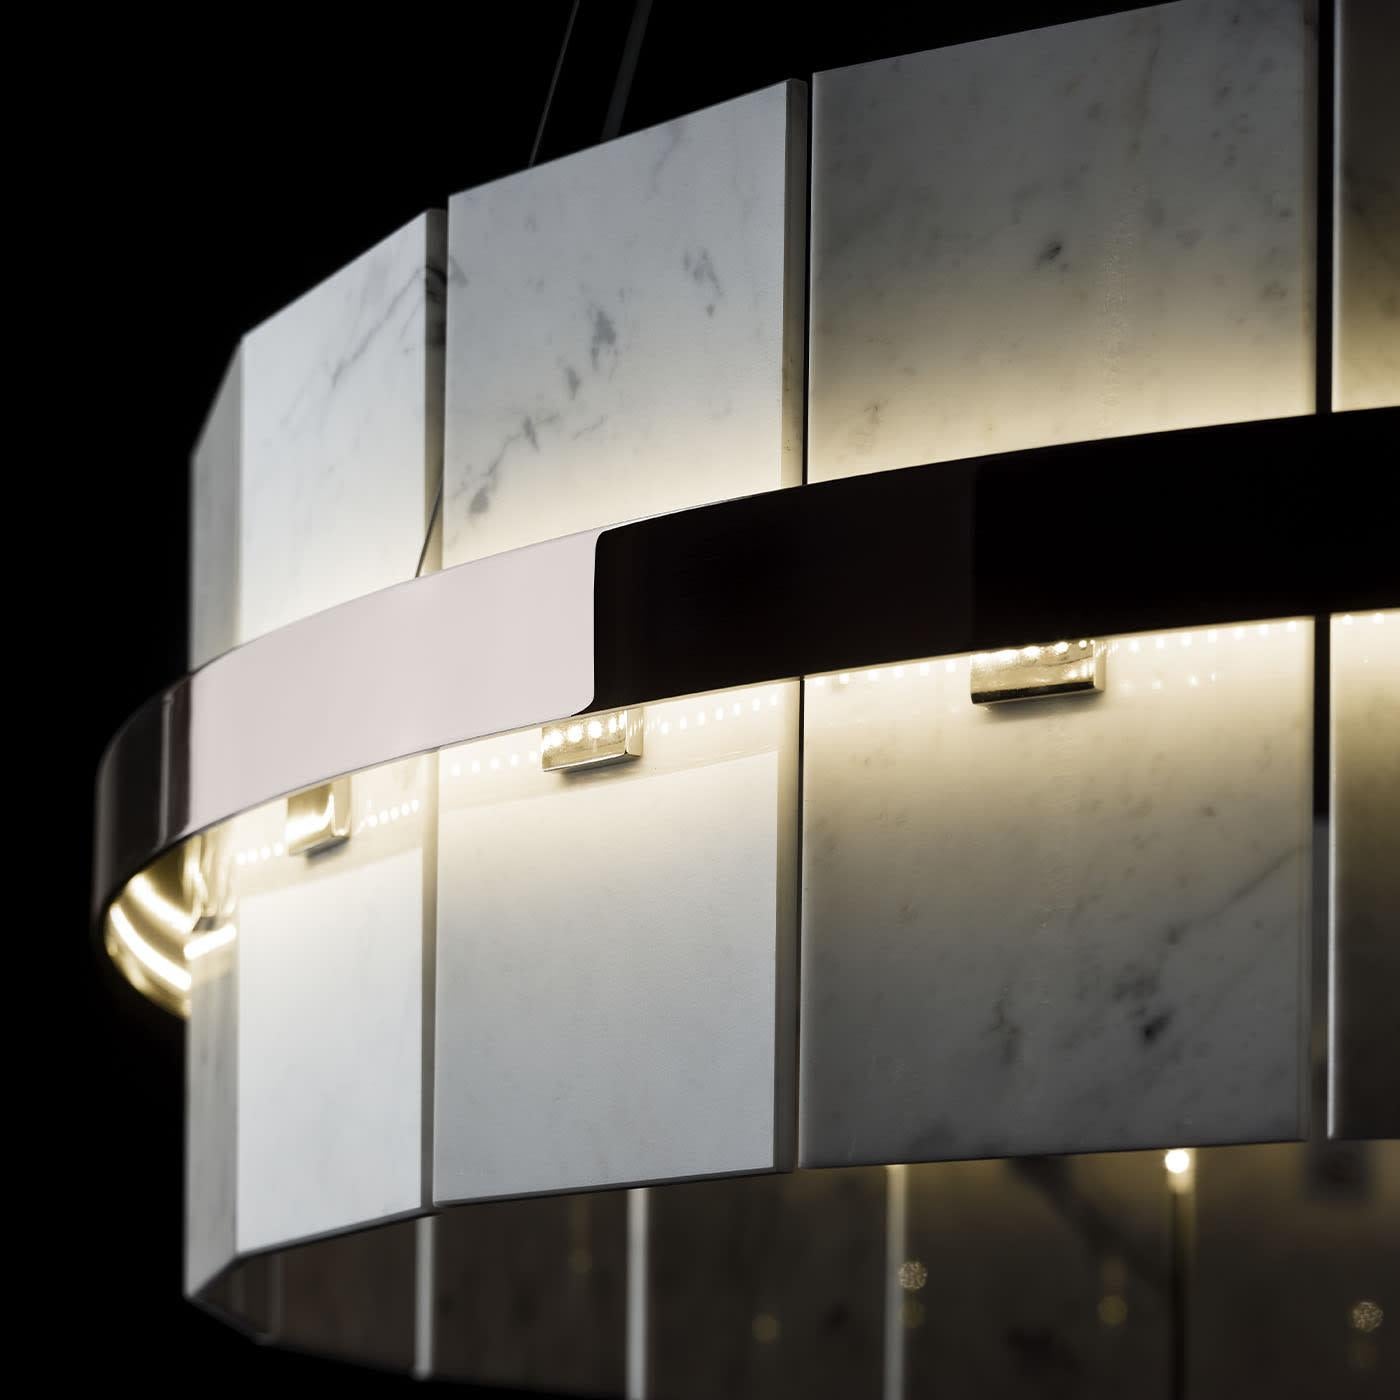 A contemporary design of timeless value, this pendant lamp will make for an iconic accent to a living room, entryway, or bedroom decor of modern inspiration. Crafted of brass, it features a circular profile enriched with white Carrara marble tiles,